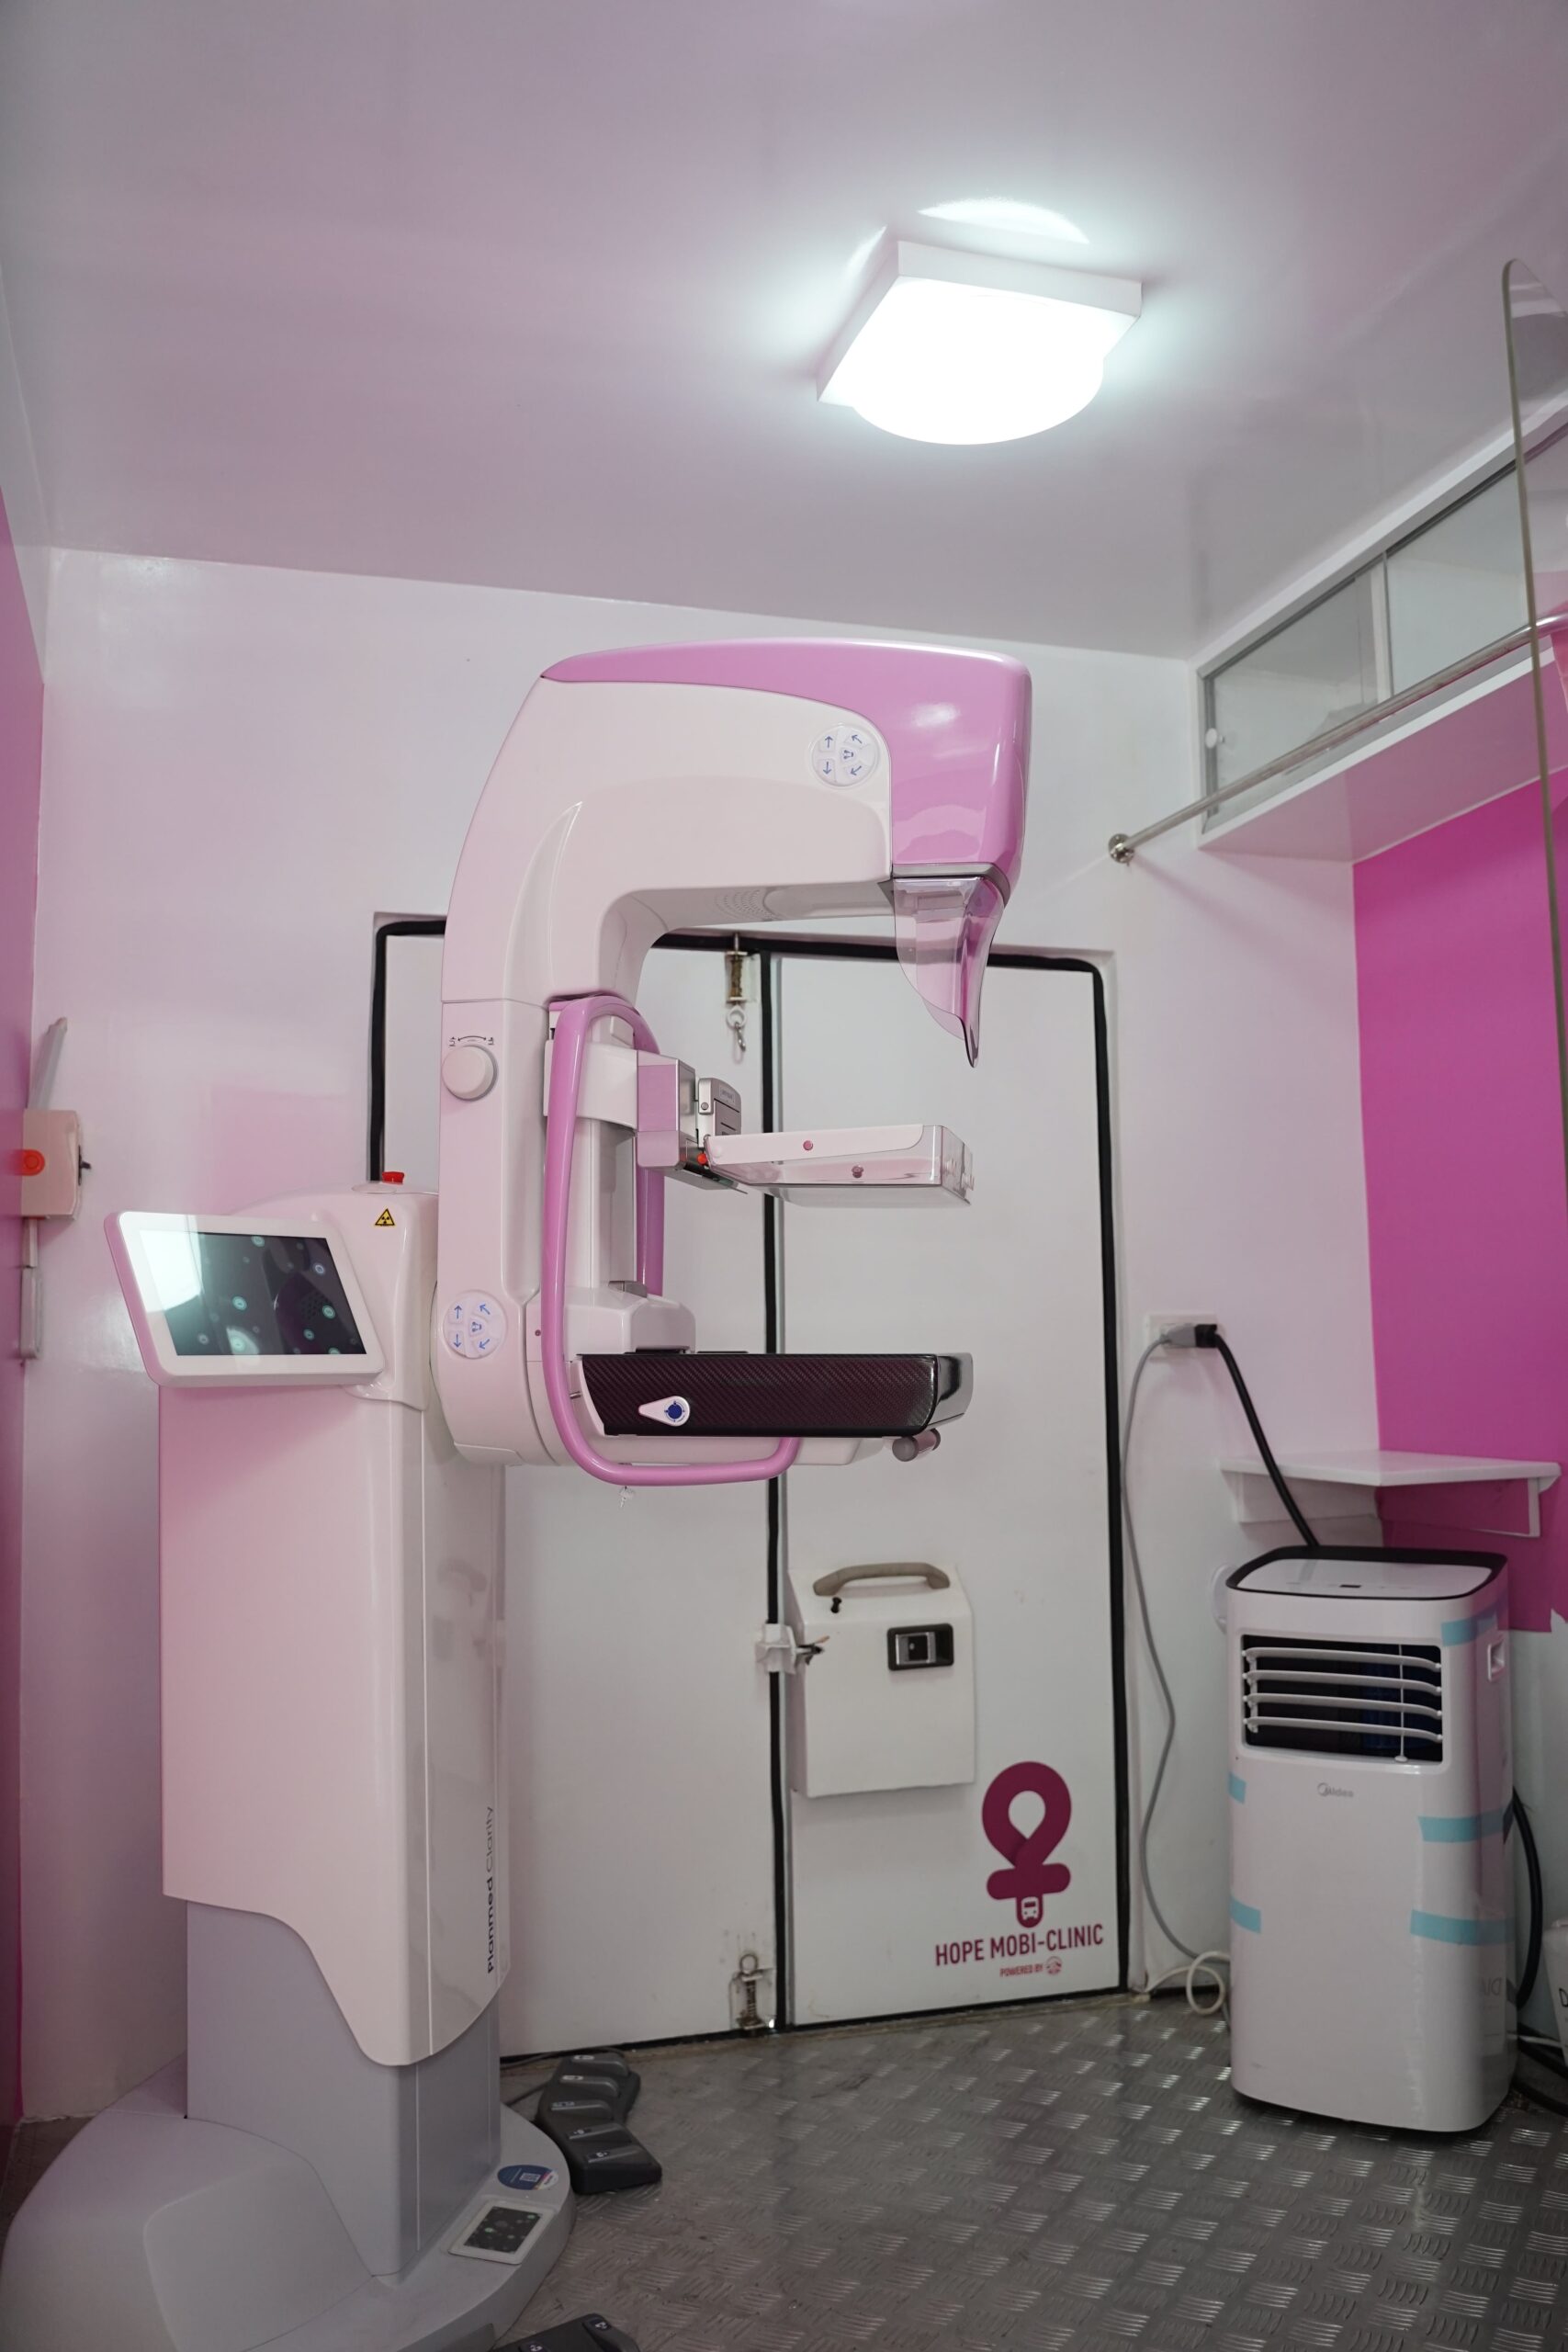 Inside AIA Philippines' The Hope Mobi Clinic